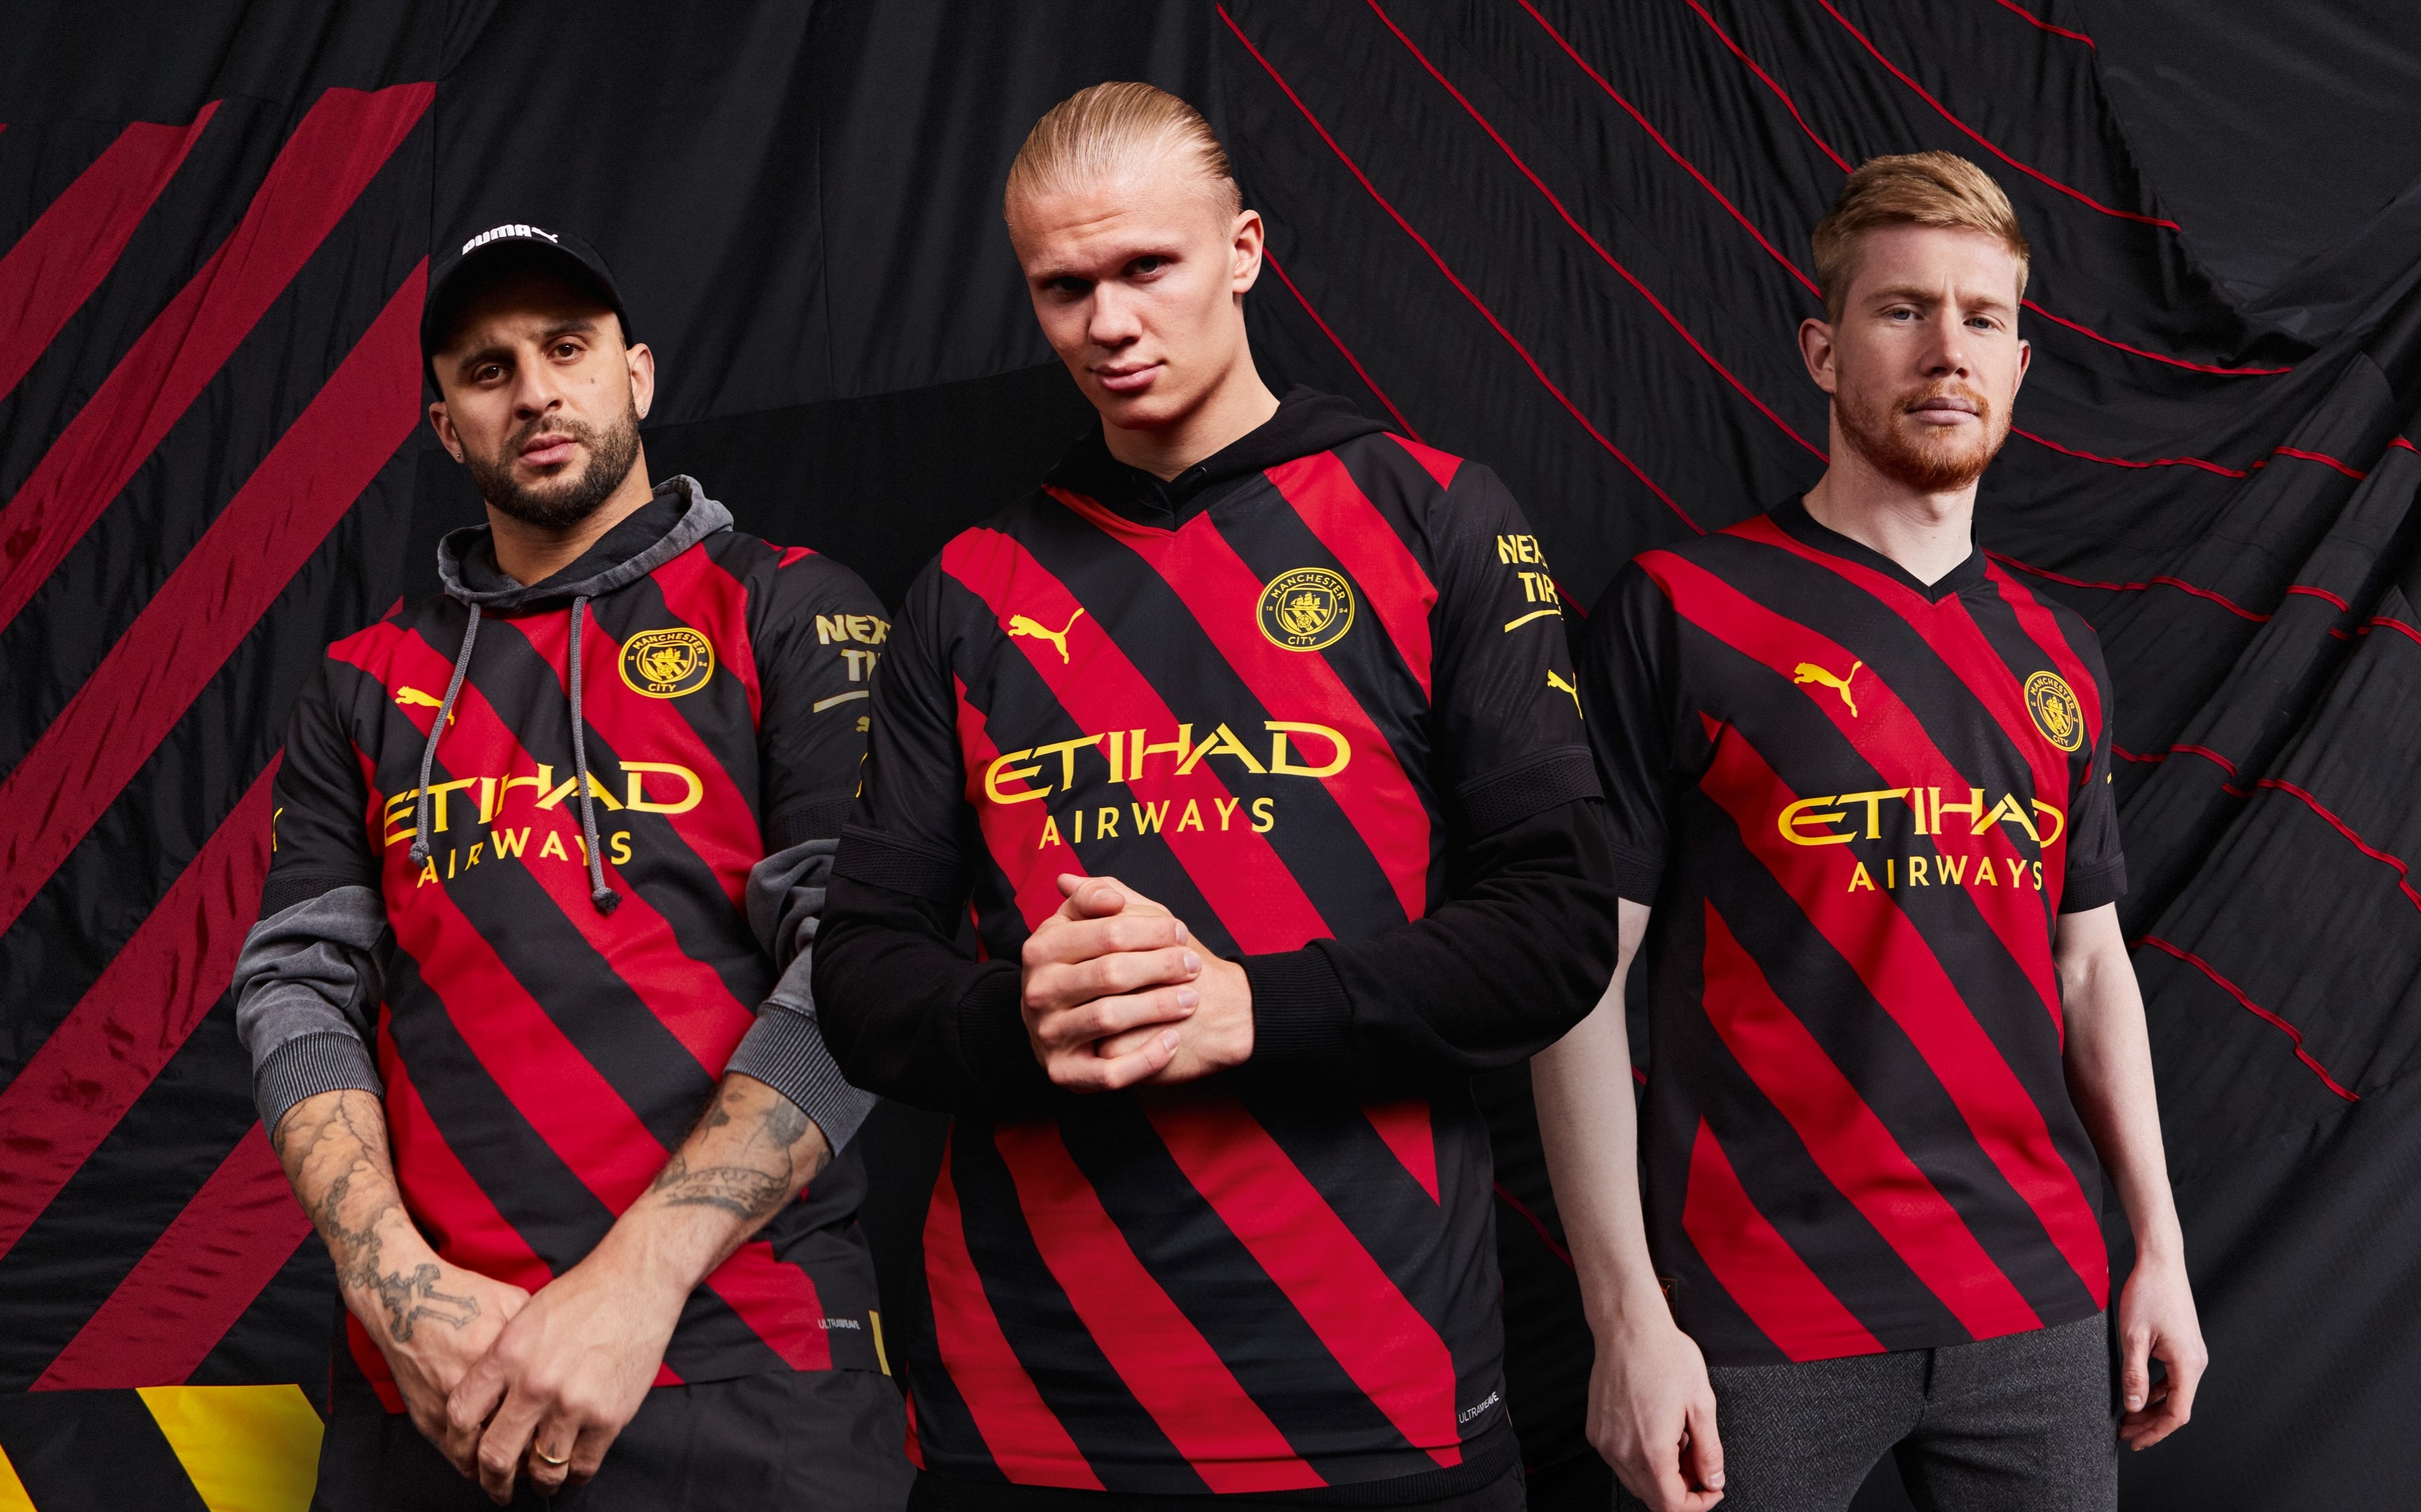 Man City give nod to past trophywinning sides with new 2223 away kit